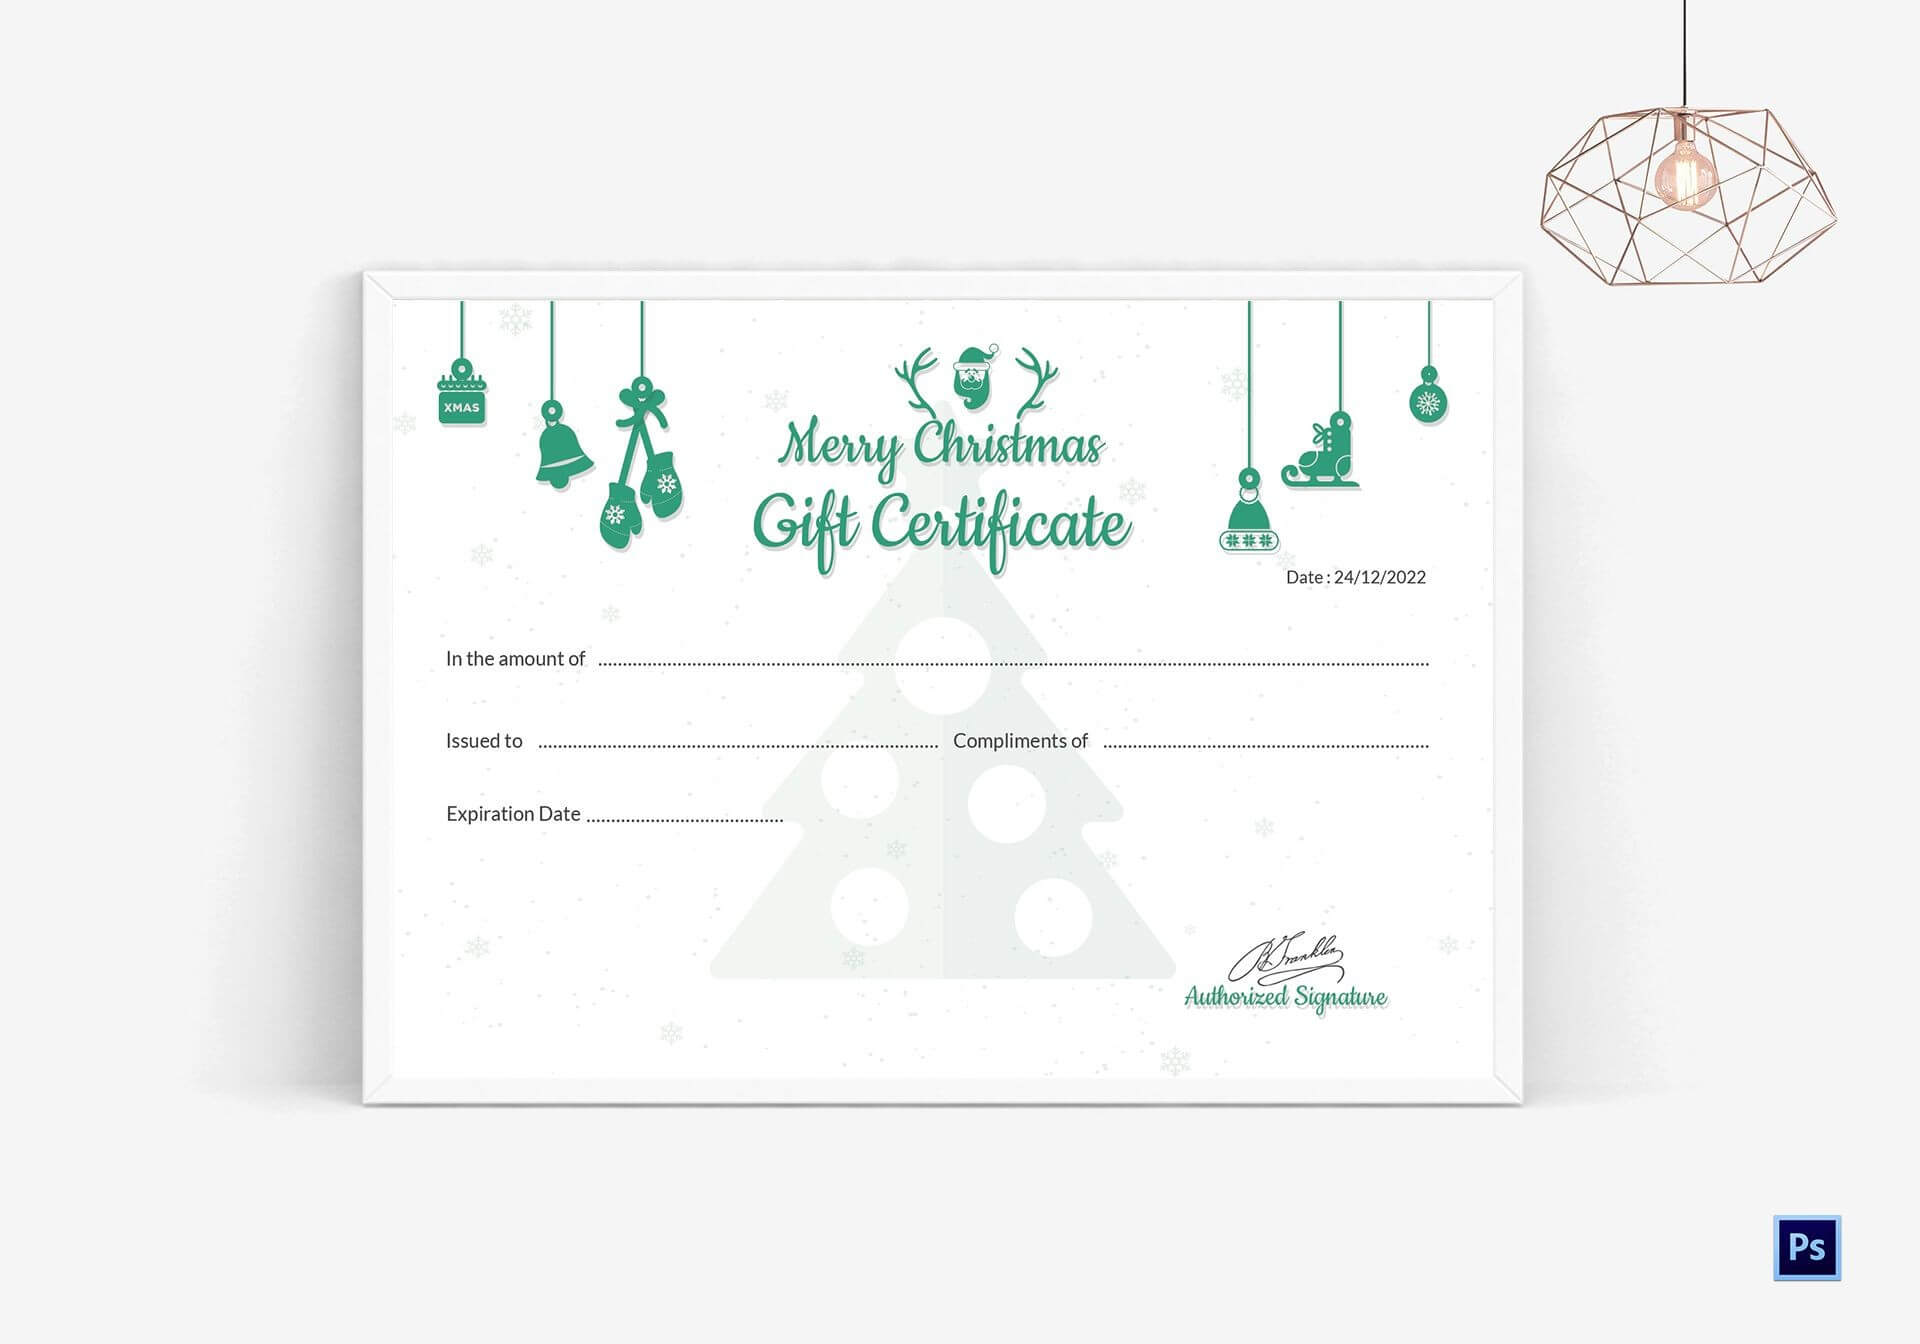 037 Photography Gift Certificate Template Photoshop Free In Merry Christmas Gift Certificate Templates